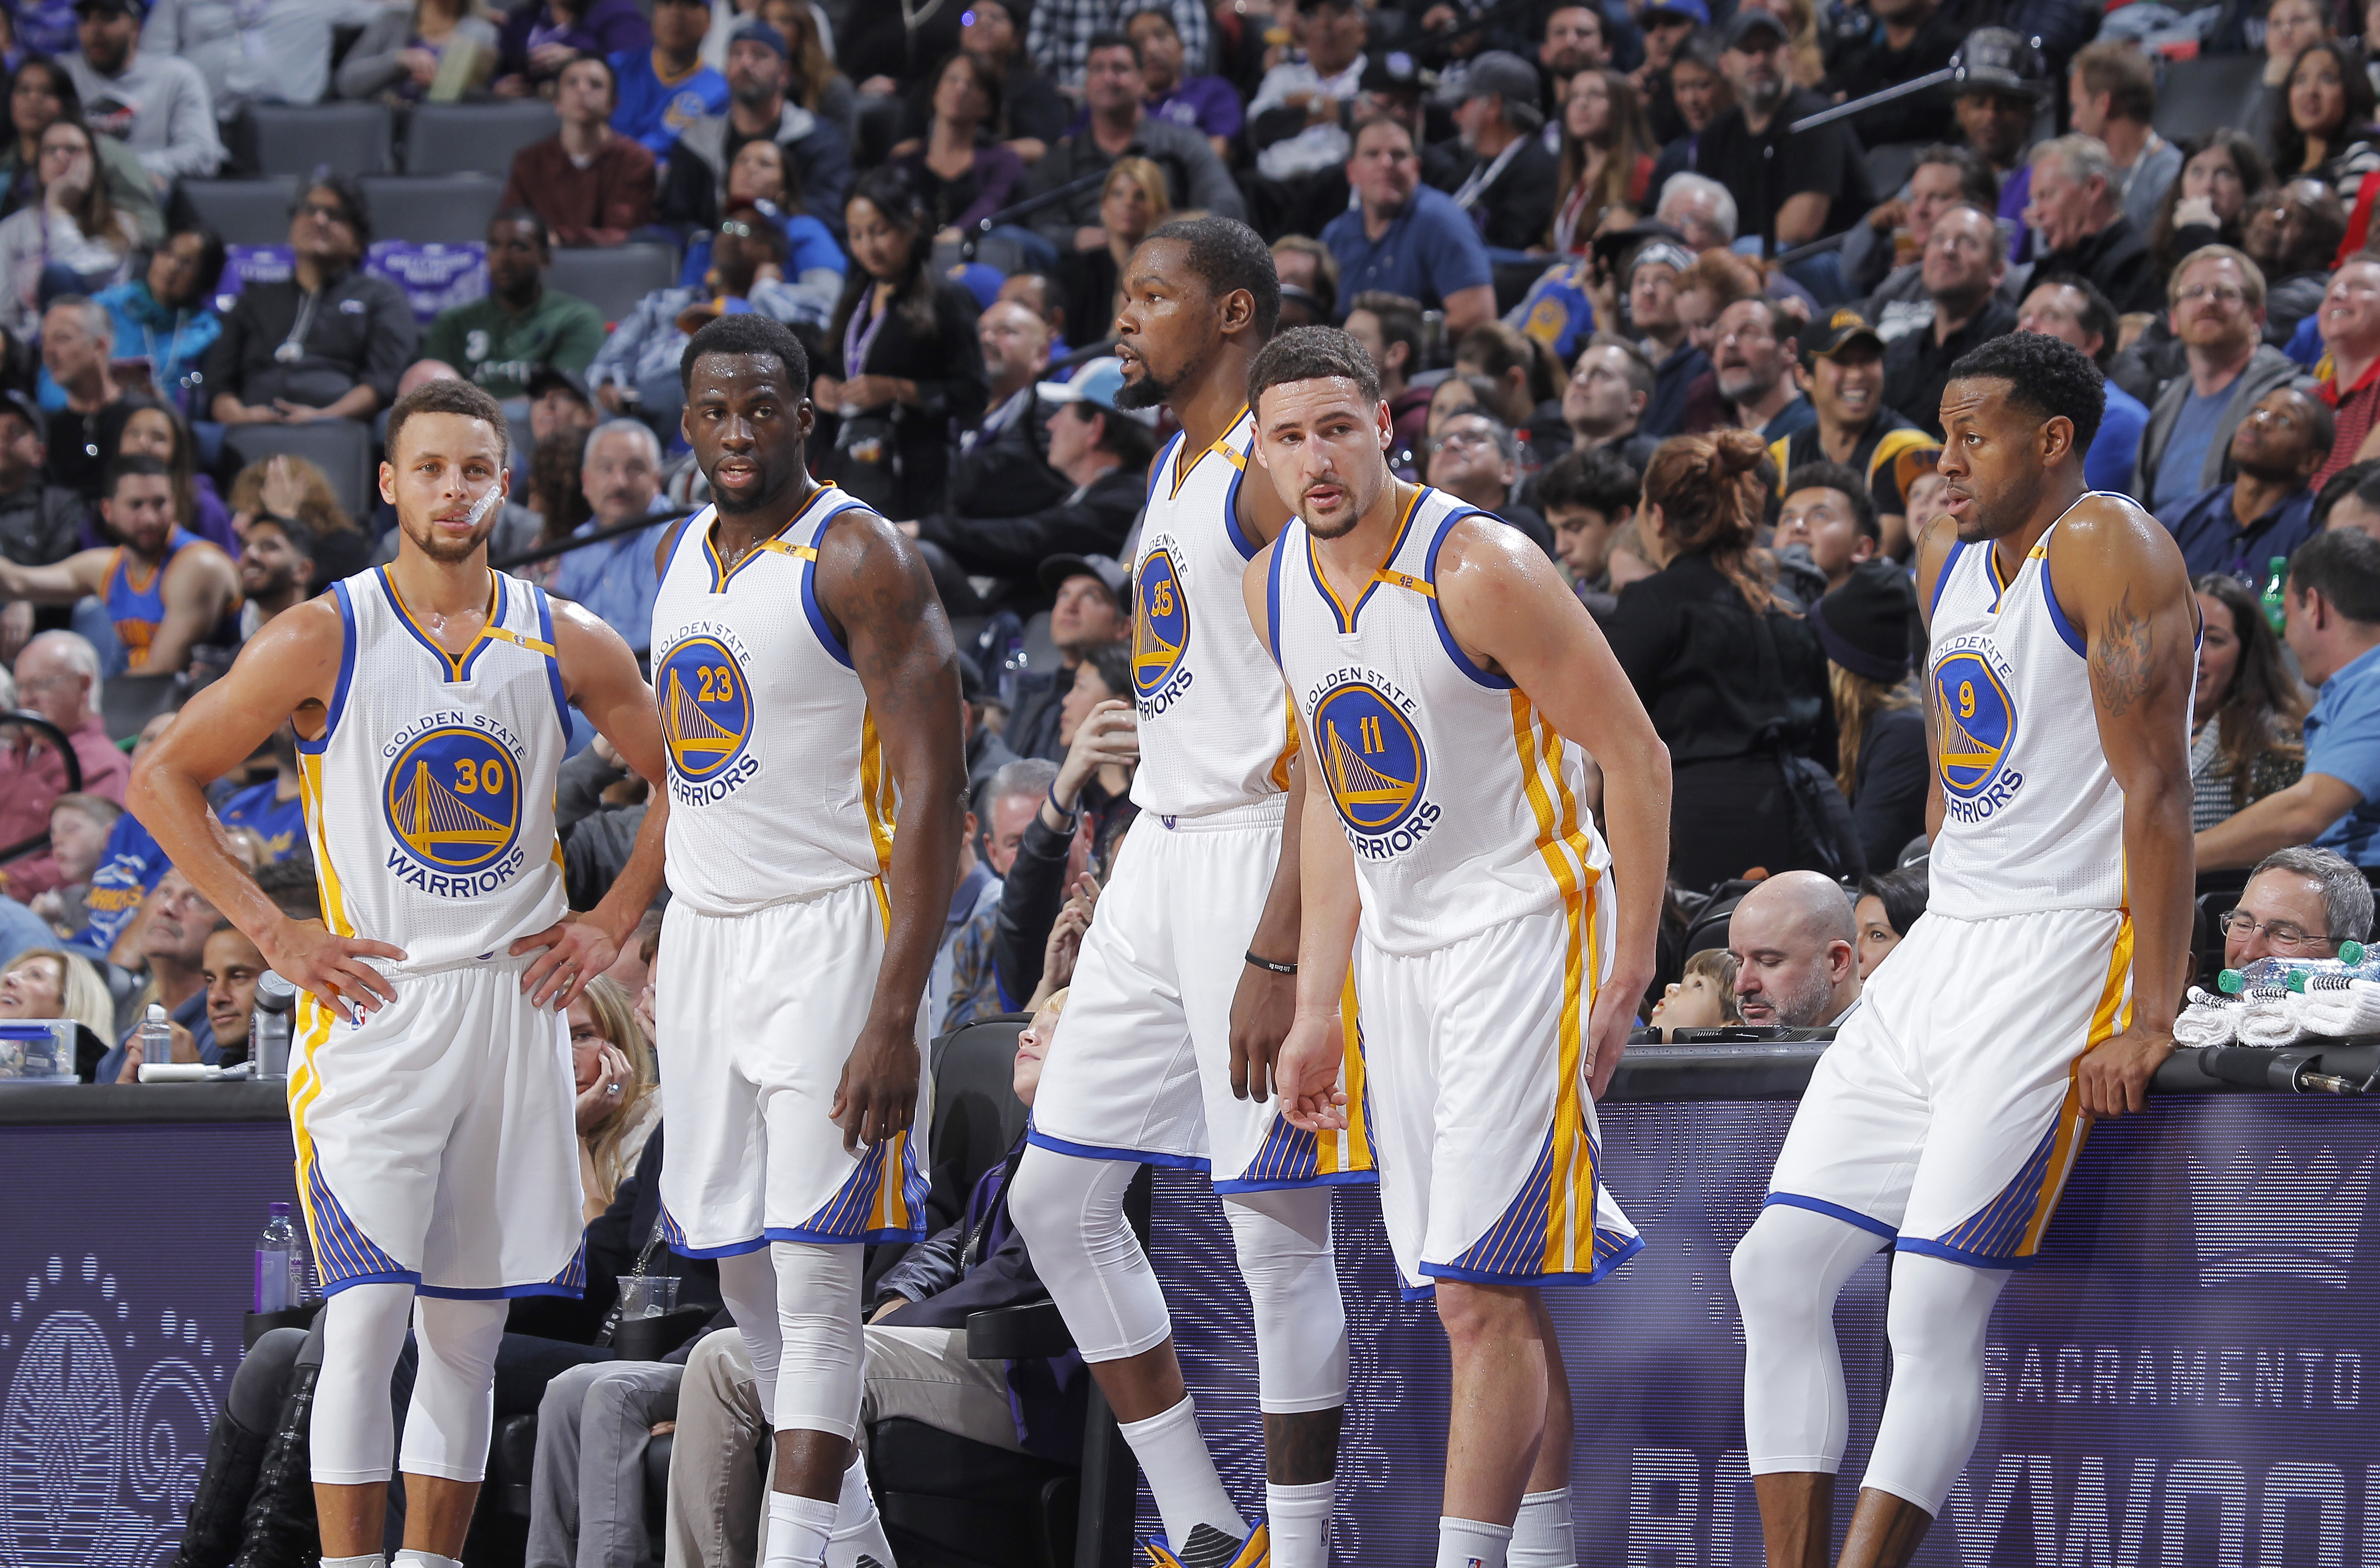 SACRAMENTO, CA - JANUARY 8: Stephen Curry #30, Draymond Green #23, Kevin Durant #35, Klay Thompson #11 and Andre Iguodala #9 of the Golden State Warriors face off against the Sacramento Kings on January 8, 2017 at Golden 1 Center in Sacramento, California. NOTE TO USER: User expressly acknowledges and agrees that, by downloading and or using this photograph, User is consenting to the terms and conditions of the Getty Images Agreement. Mandatory Copyright Notice: Copyright 2017 NBAE (Photo by Rocky Widner/NBAE via Getty Images)